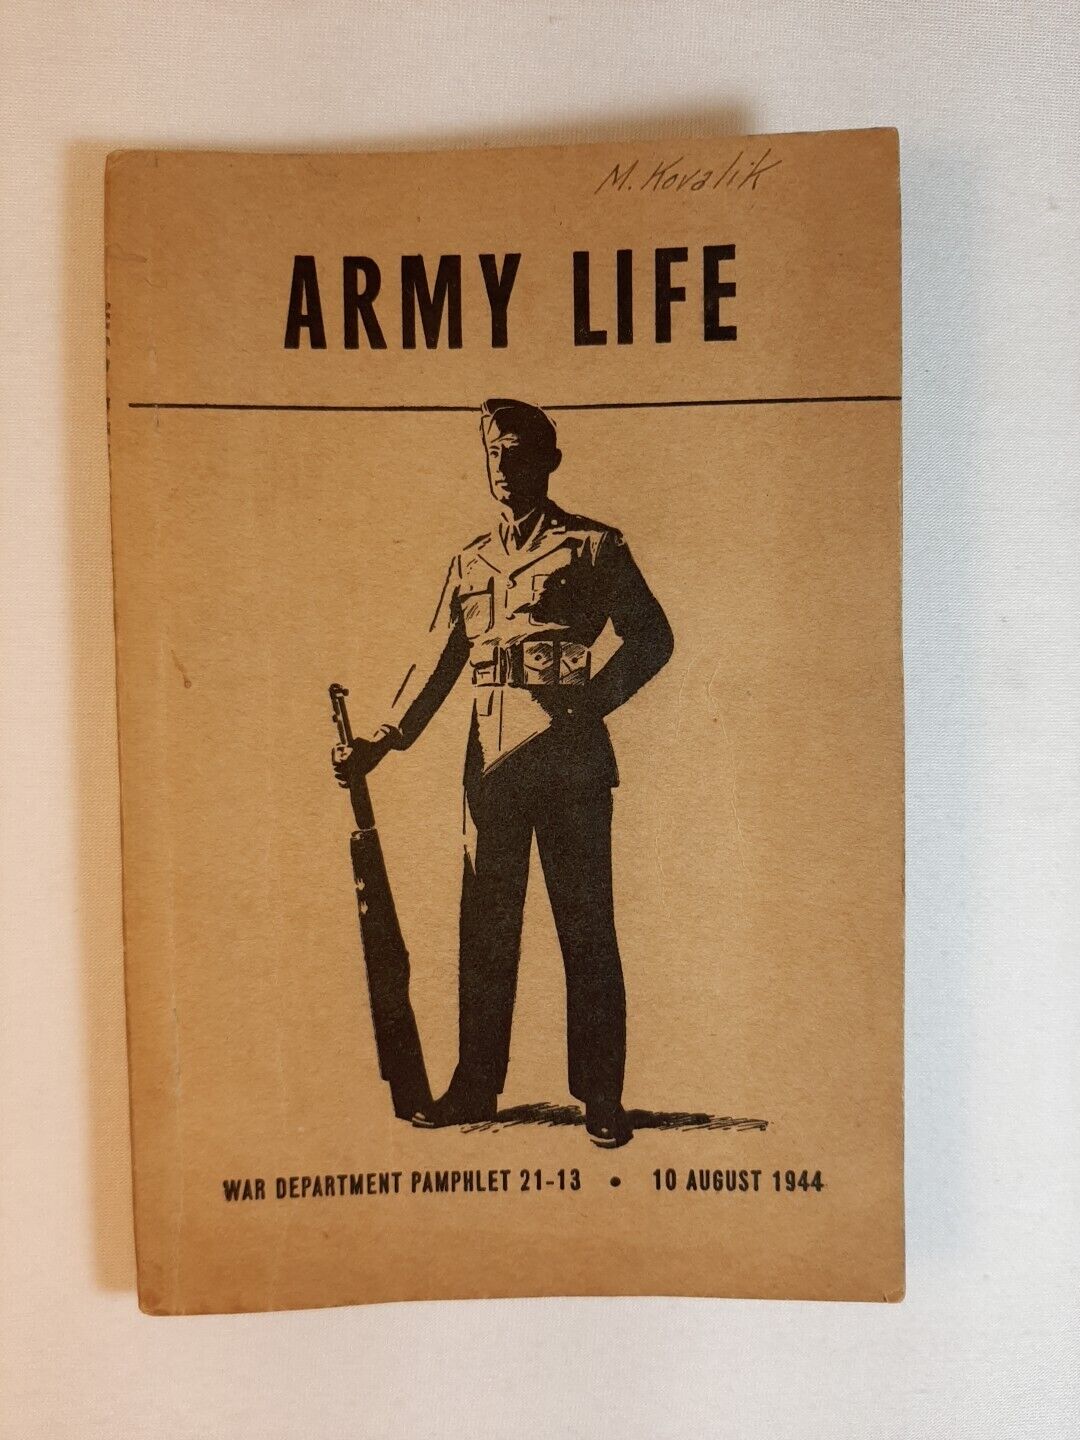 WWII ARMY LIFE WAR DEPARTMENT PAMPHLET BOOK 21-13,  AUGUST 1944, WW2